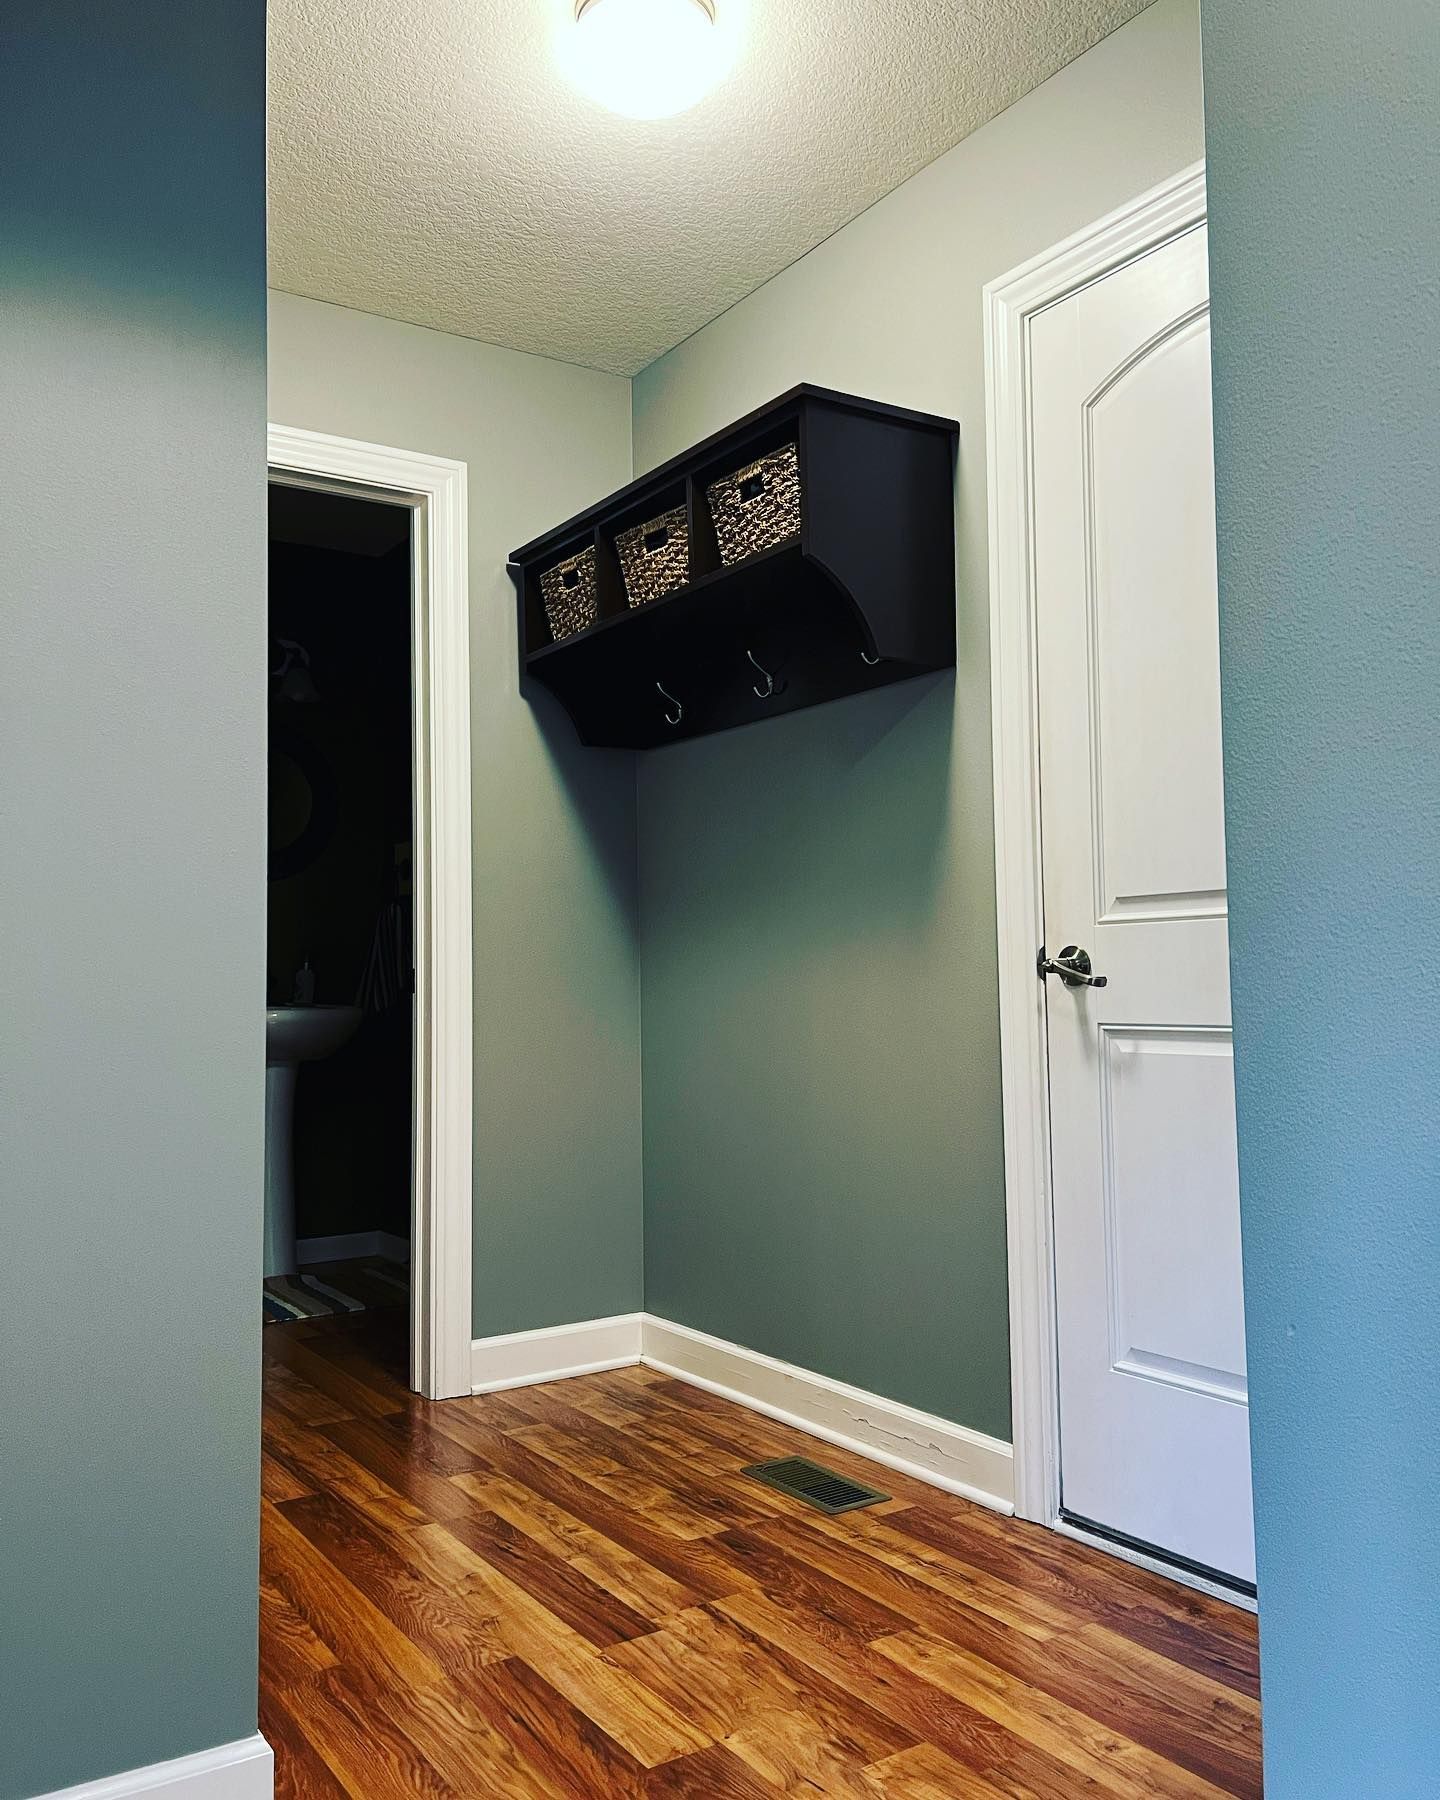 Interiors for True Blue Painting, LLC in Des Moines, IA